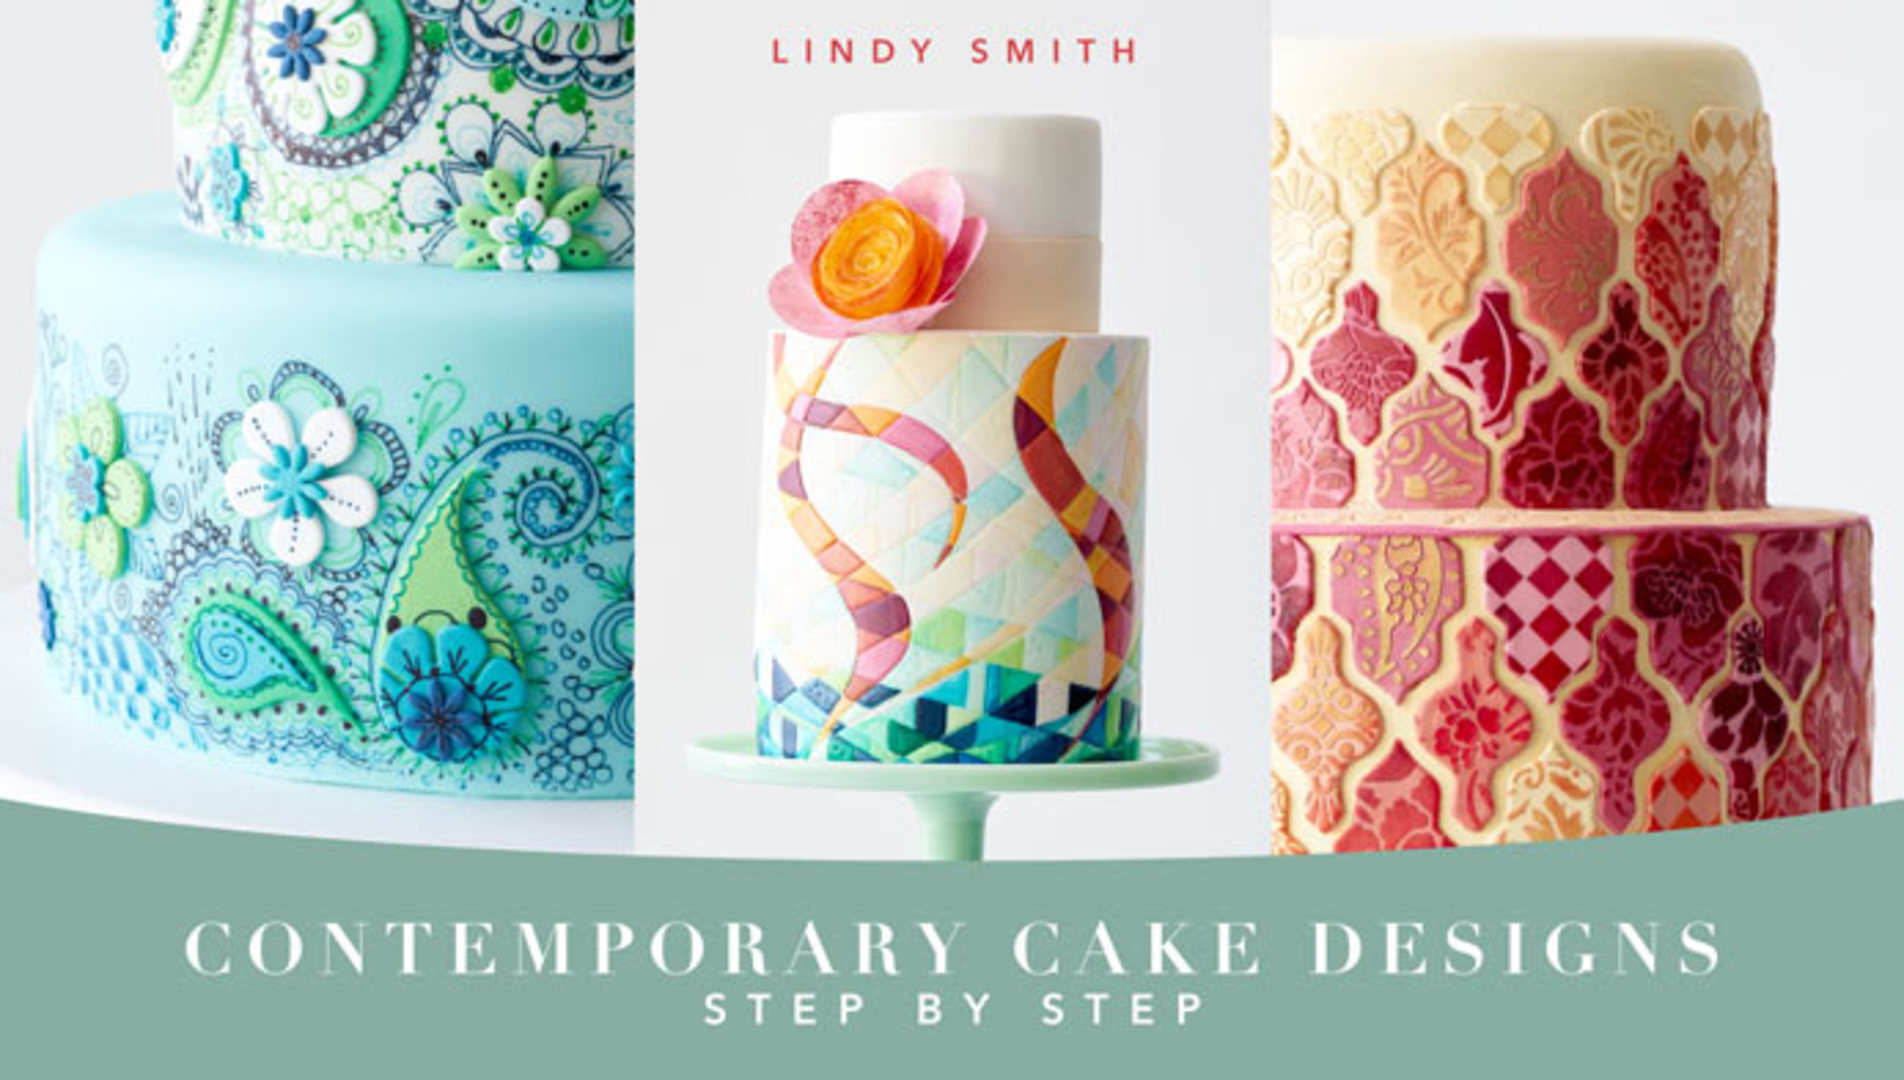 Search Press | The Contemporary Cake Decorating Bible by Lindy Smith